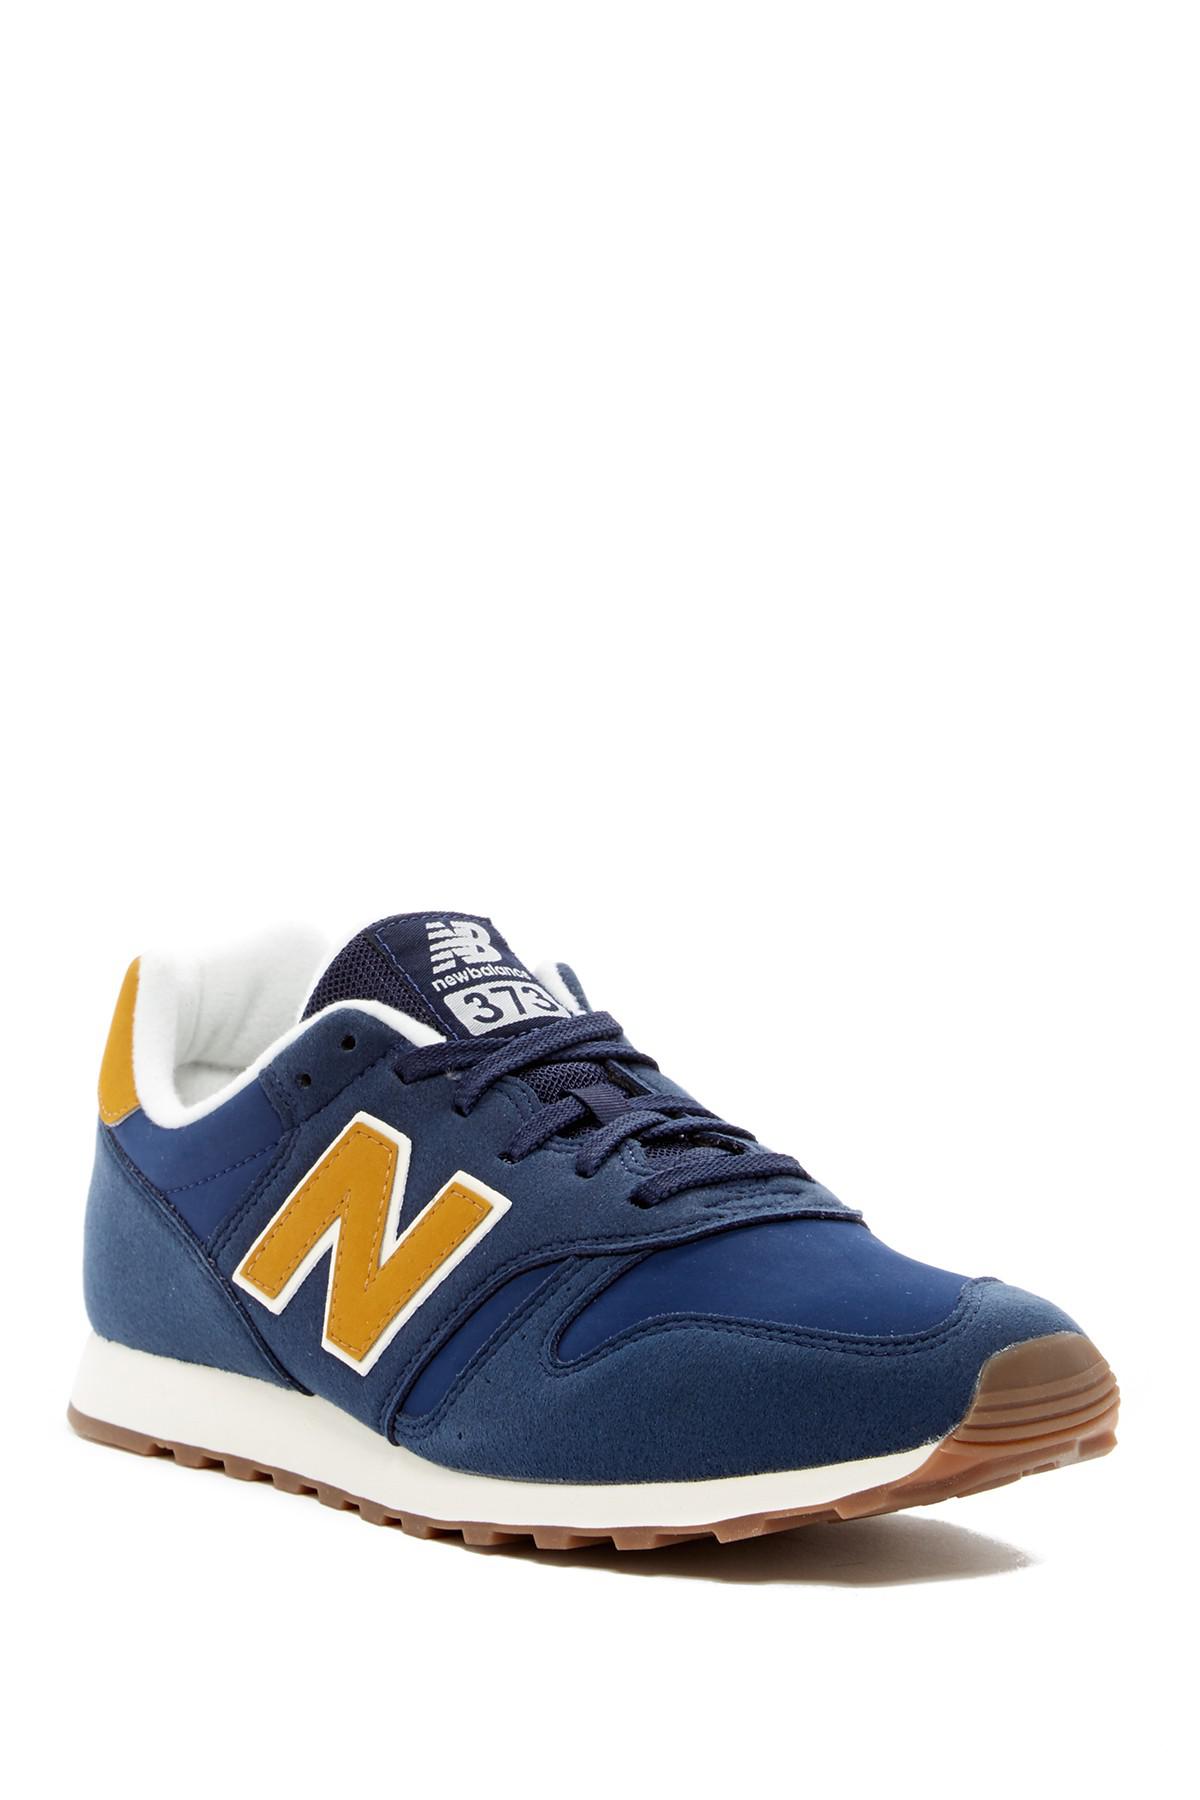 New Balance Ml373 Classic Sneaker - Available in Blue for Men Lyst